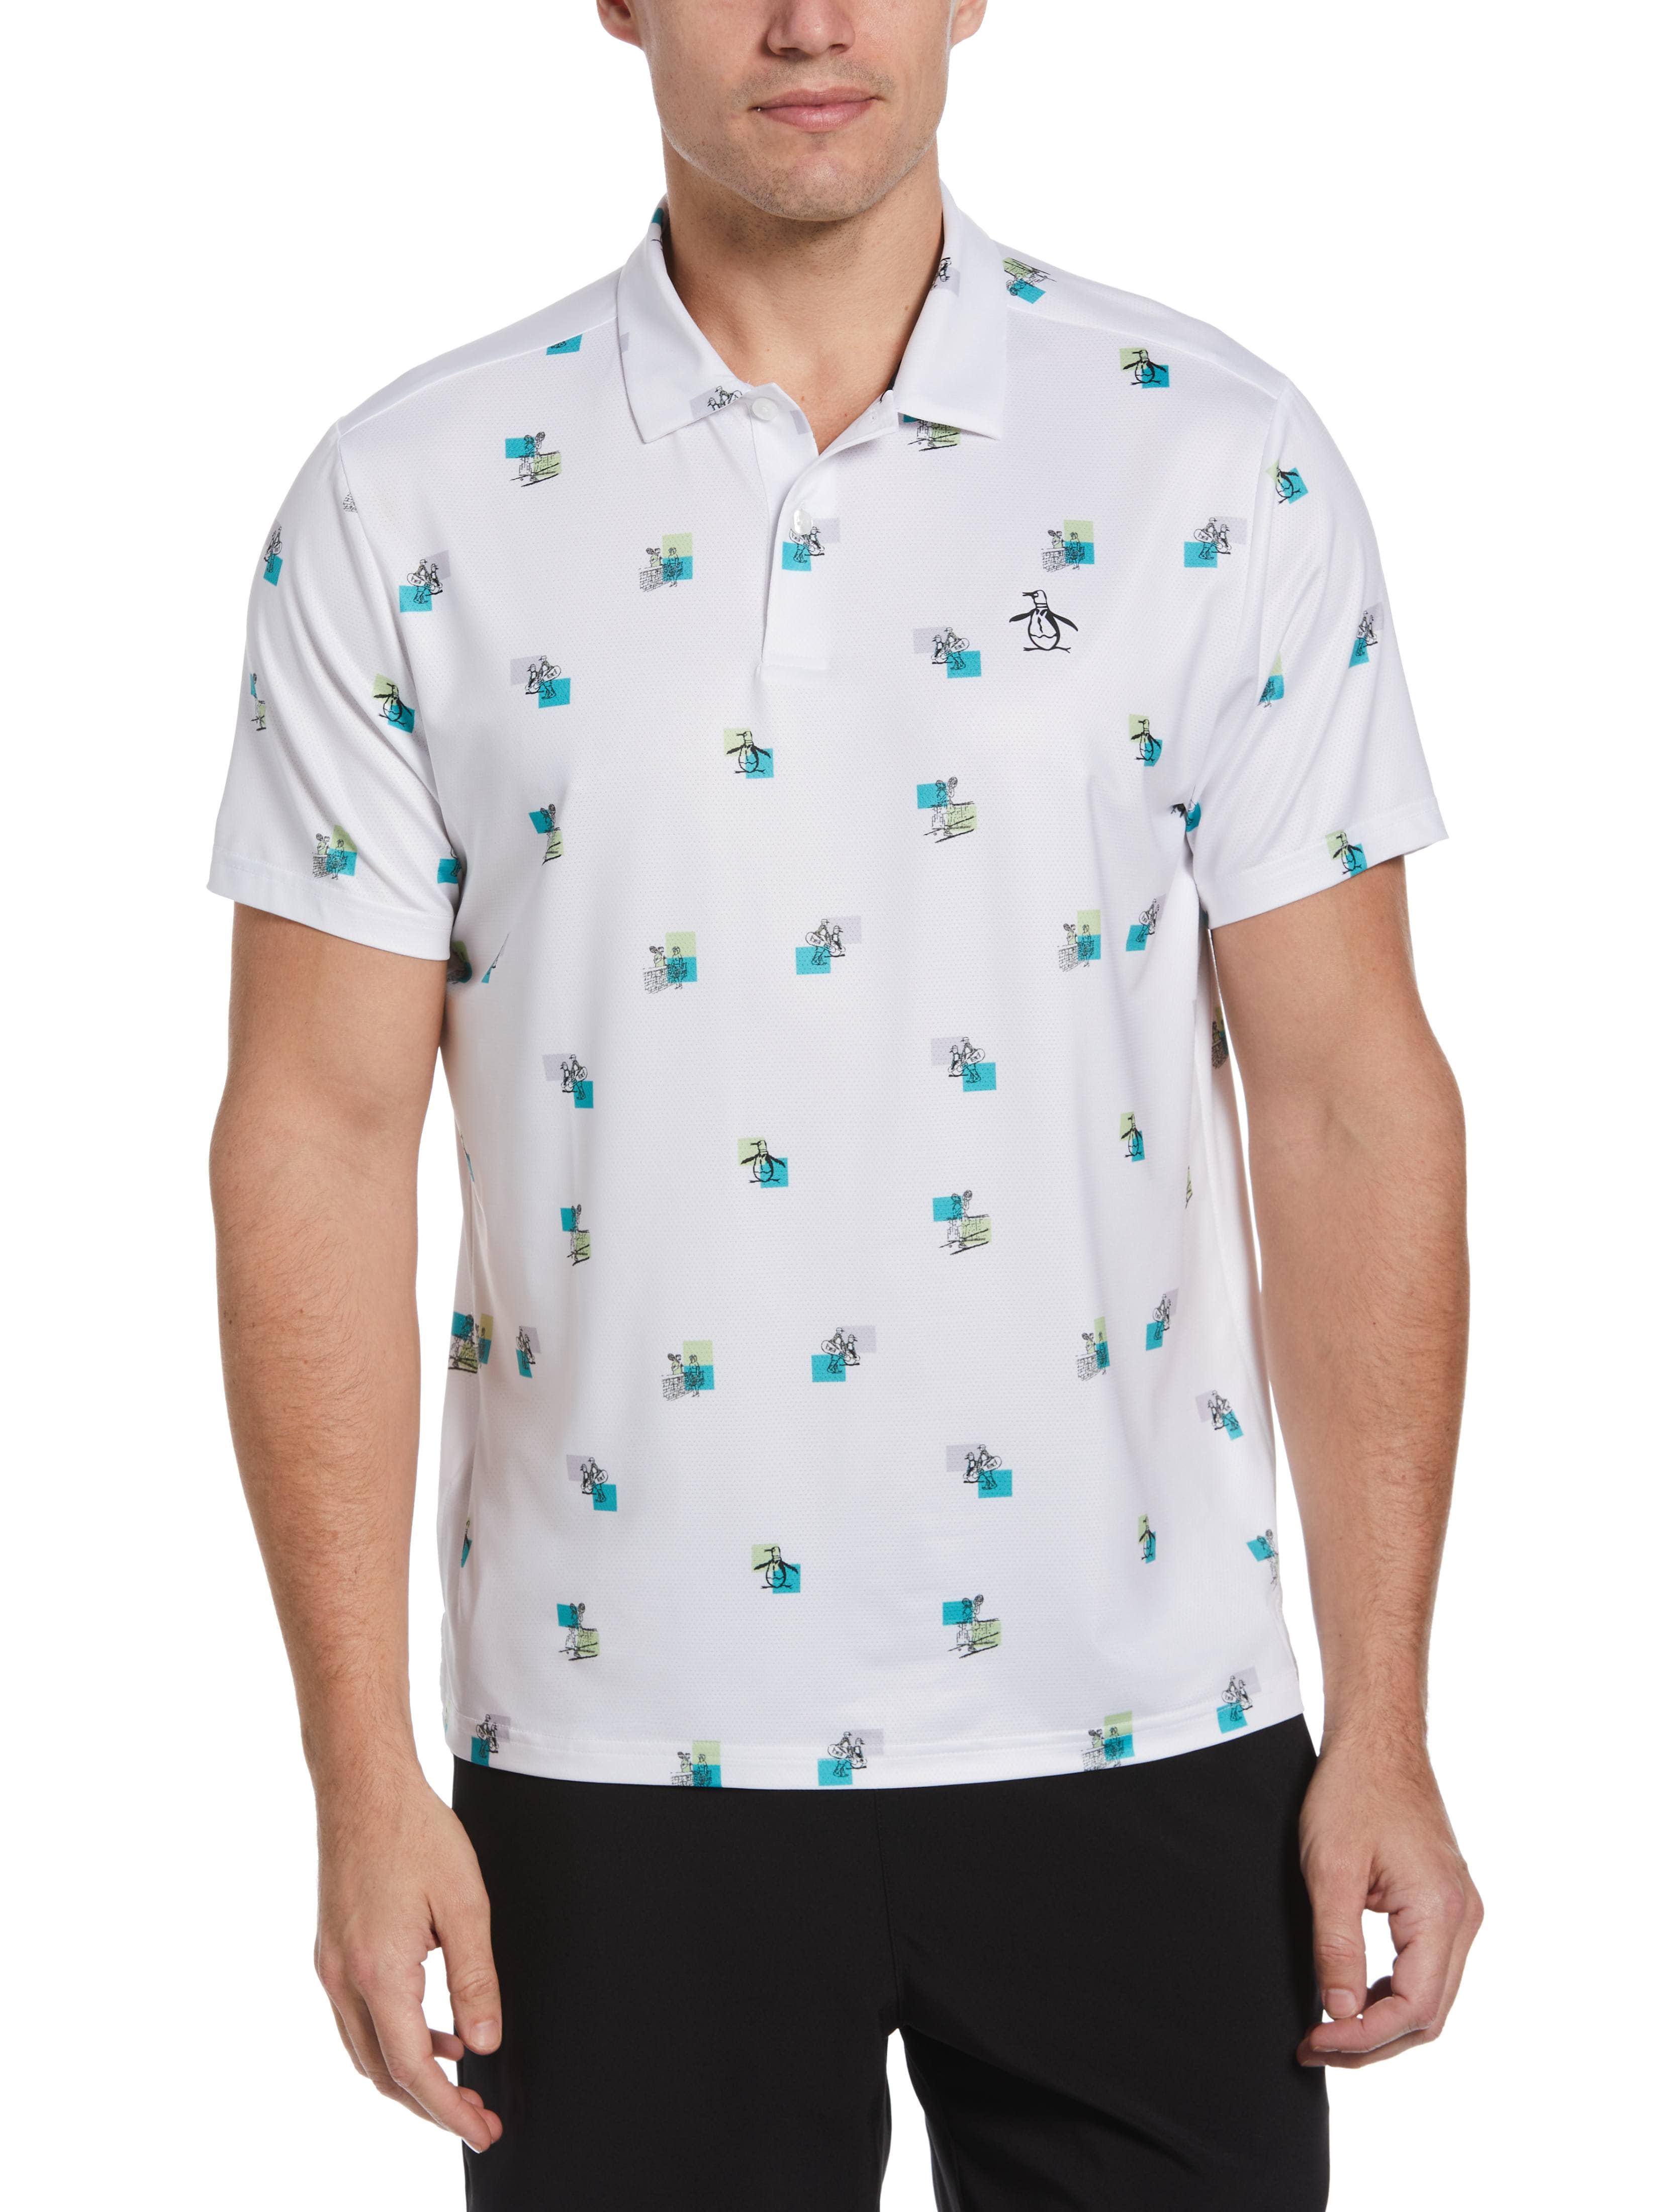 Original Penguin Mens Performance Heritage Print Tennis Polo Shirt, Size Large, White, Polyester/Recycled Polyester/Elastane | Golf Apparel Shop